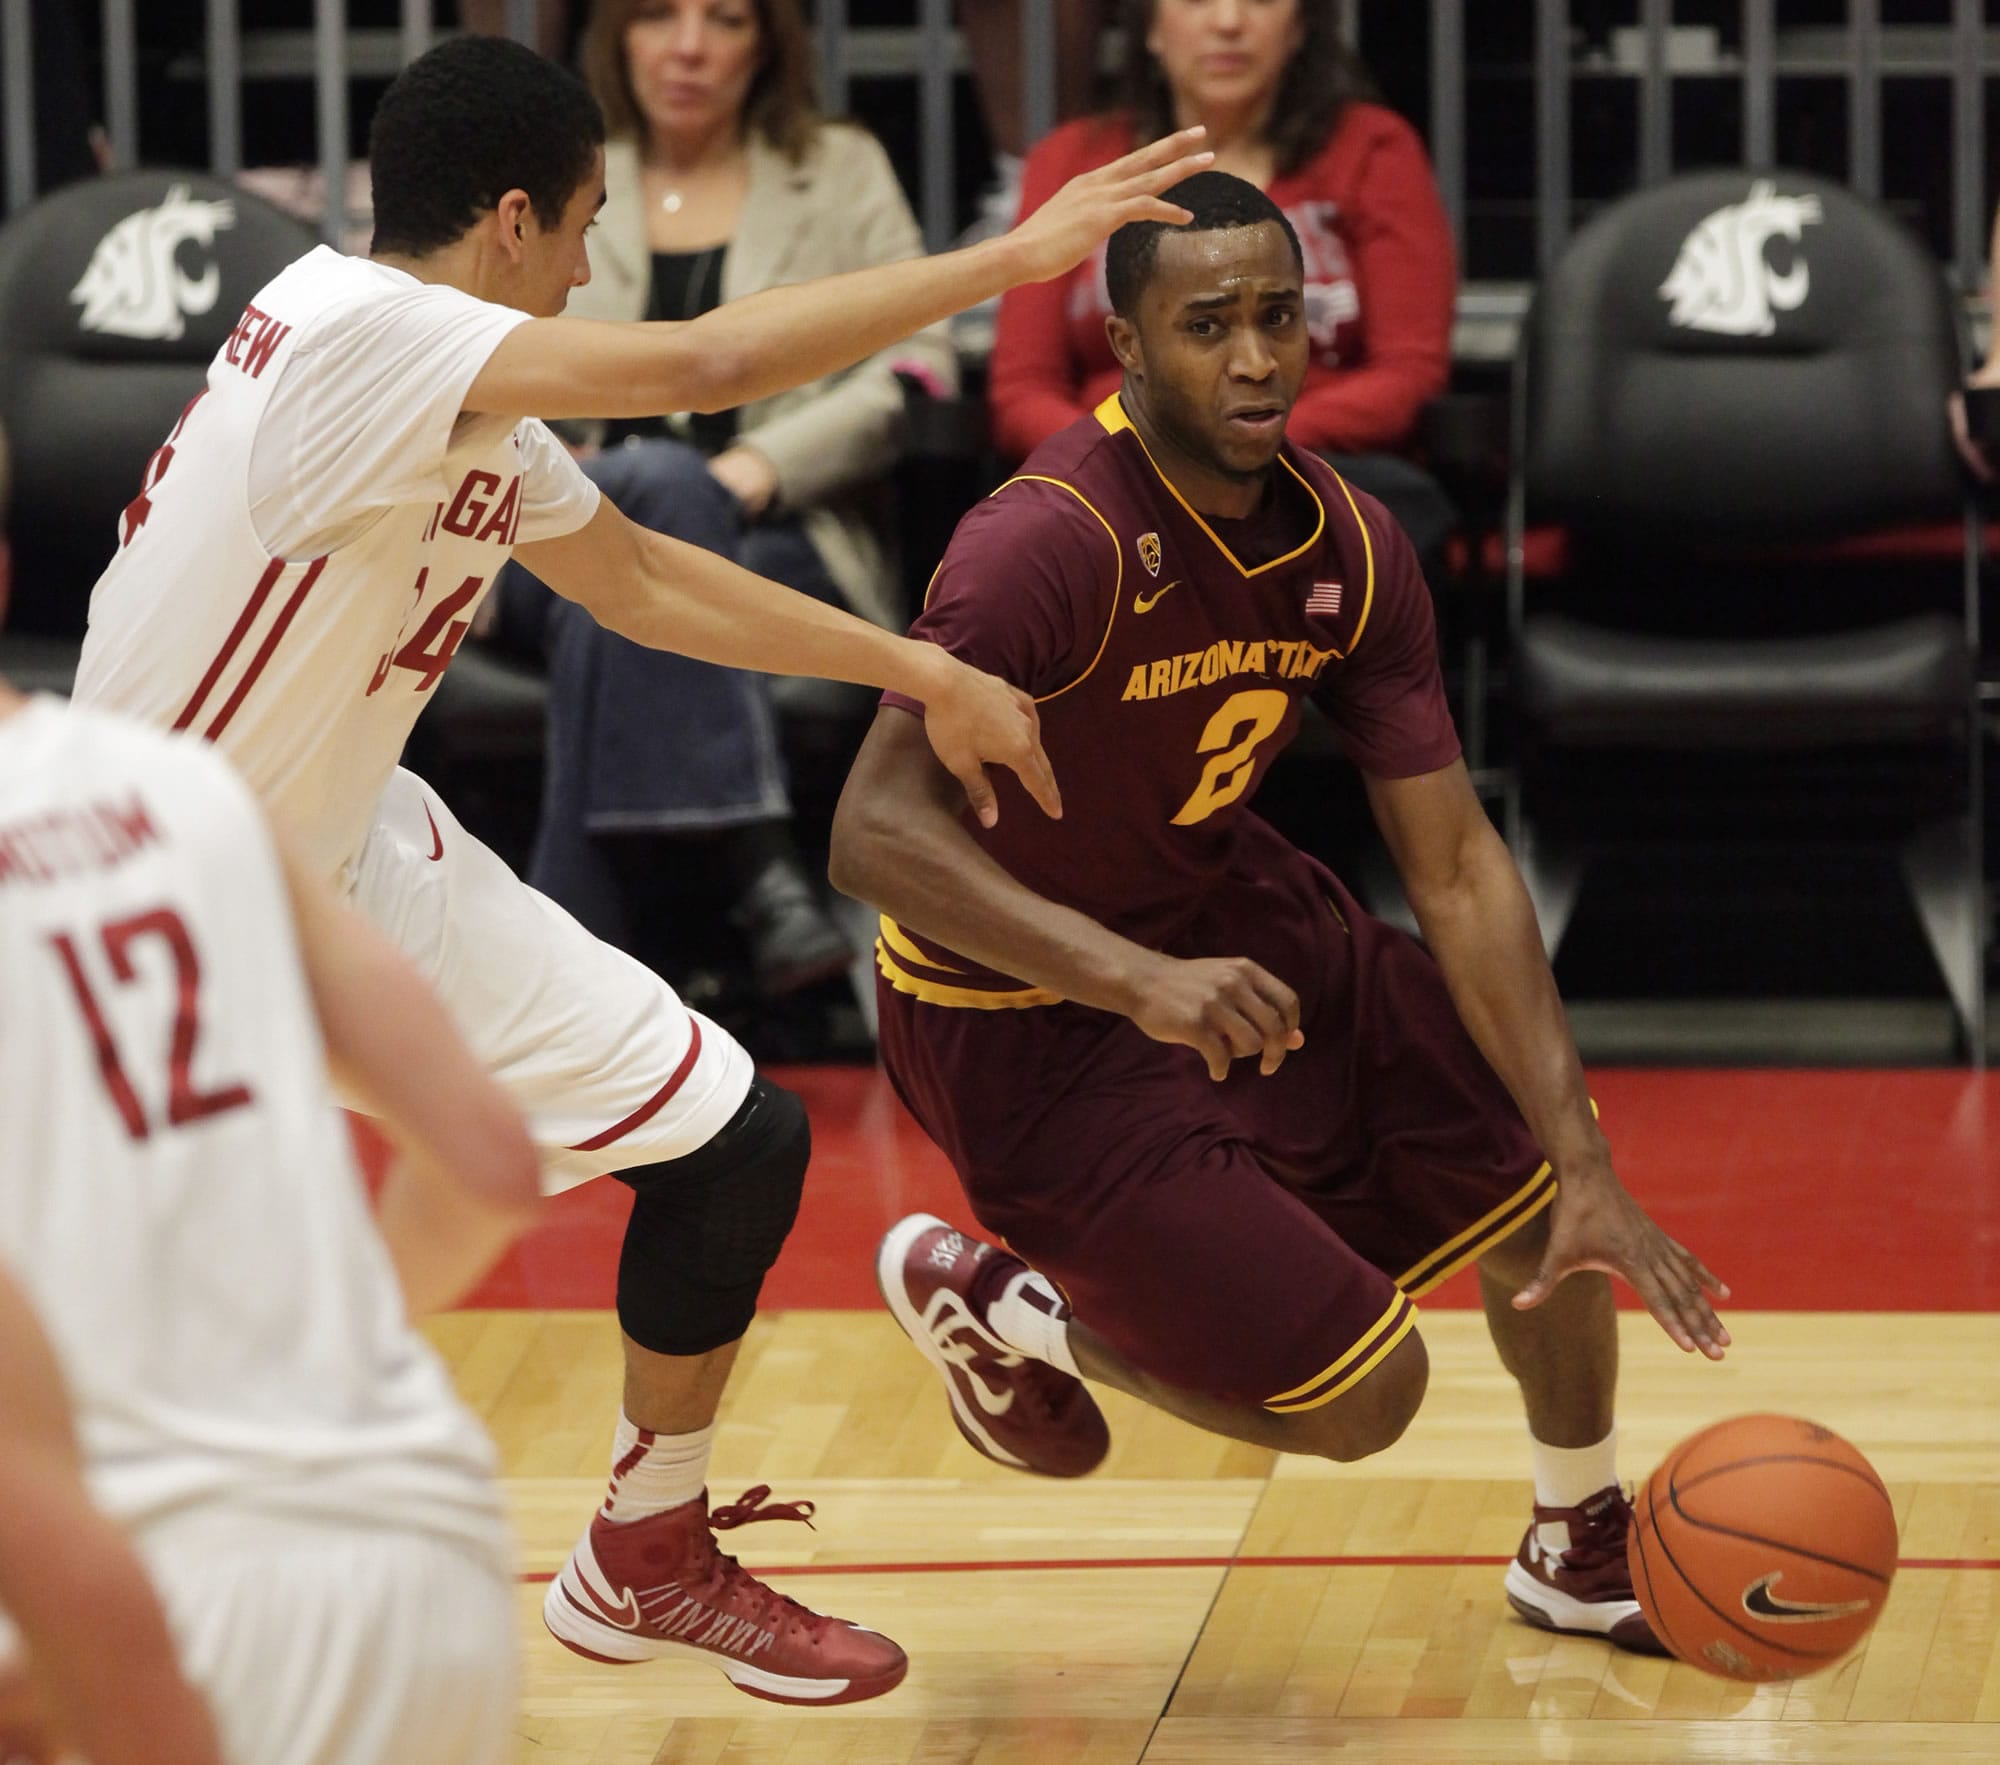 Arizona State guard Chris Colvin (2) drives around Washington State guard Dexter Kernich-Drew, left, during the second half of an NCAA college basketball game, Thursday, Jan. 31, 2013, in Pullman, Wash. Arizona State won 63-59.